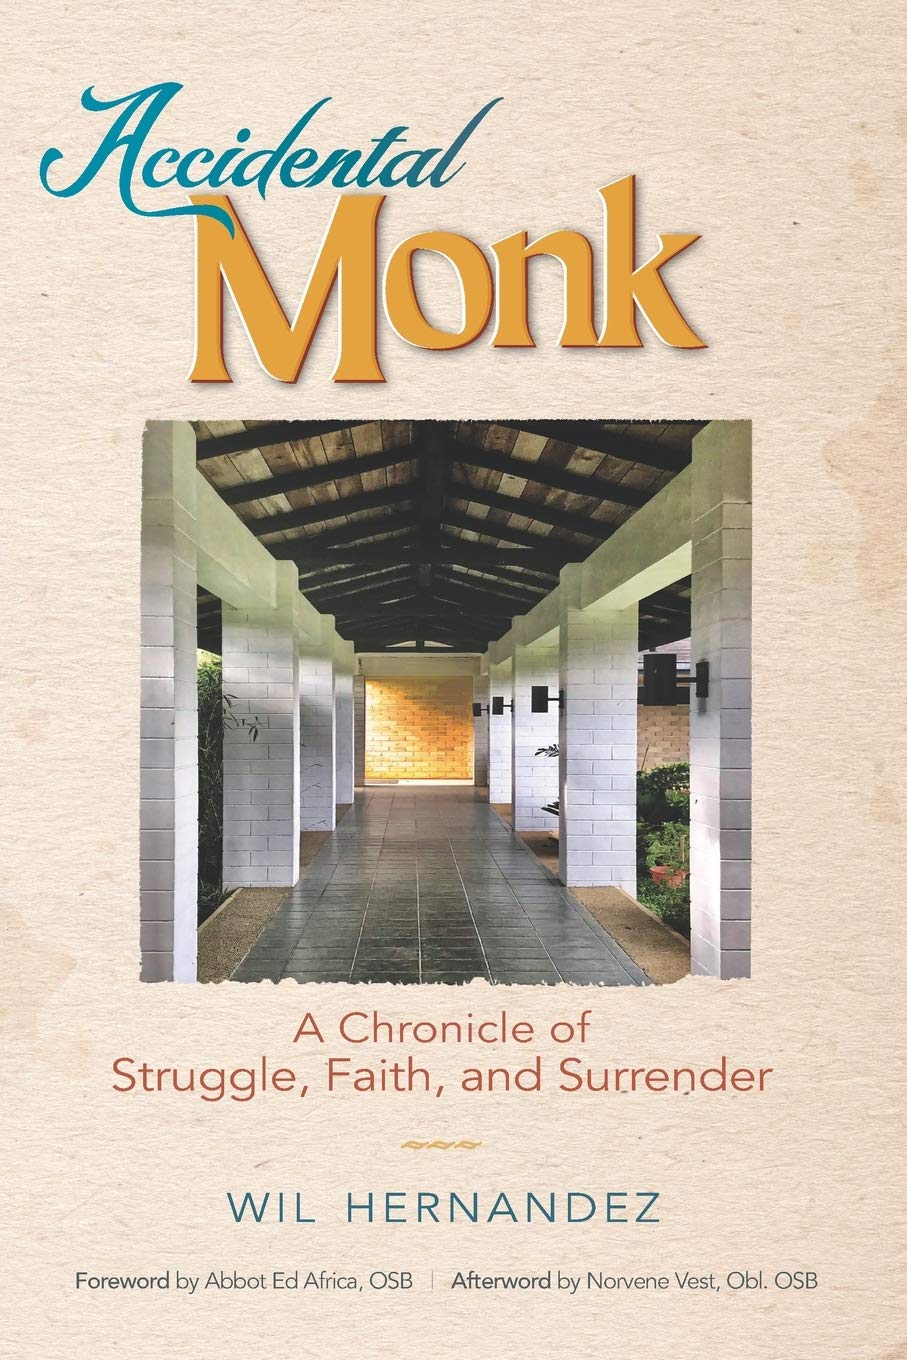 Hernandez, Wil: Accidental Monk- A Chronicle of Struggle, Faith, and Surrender